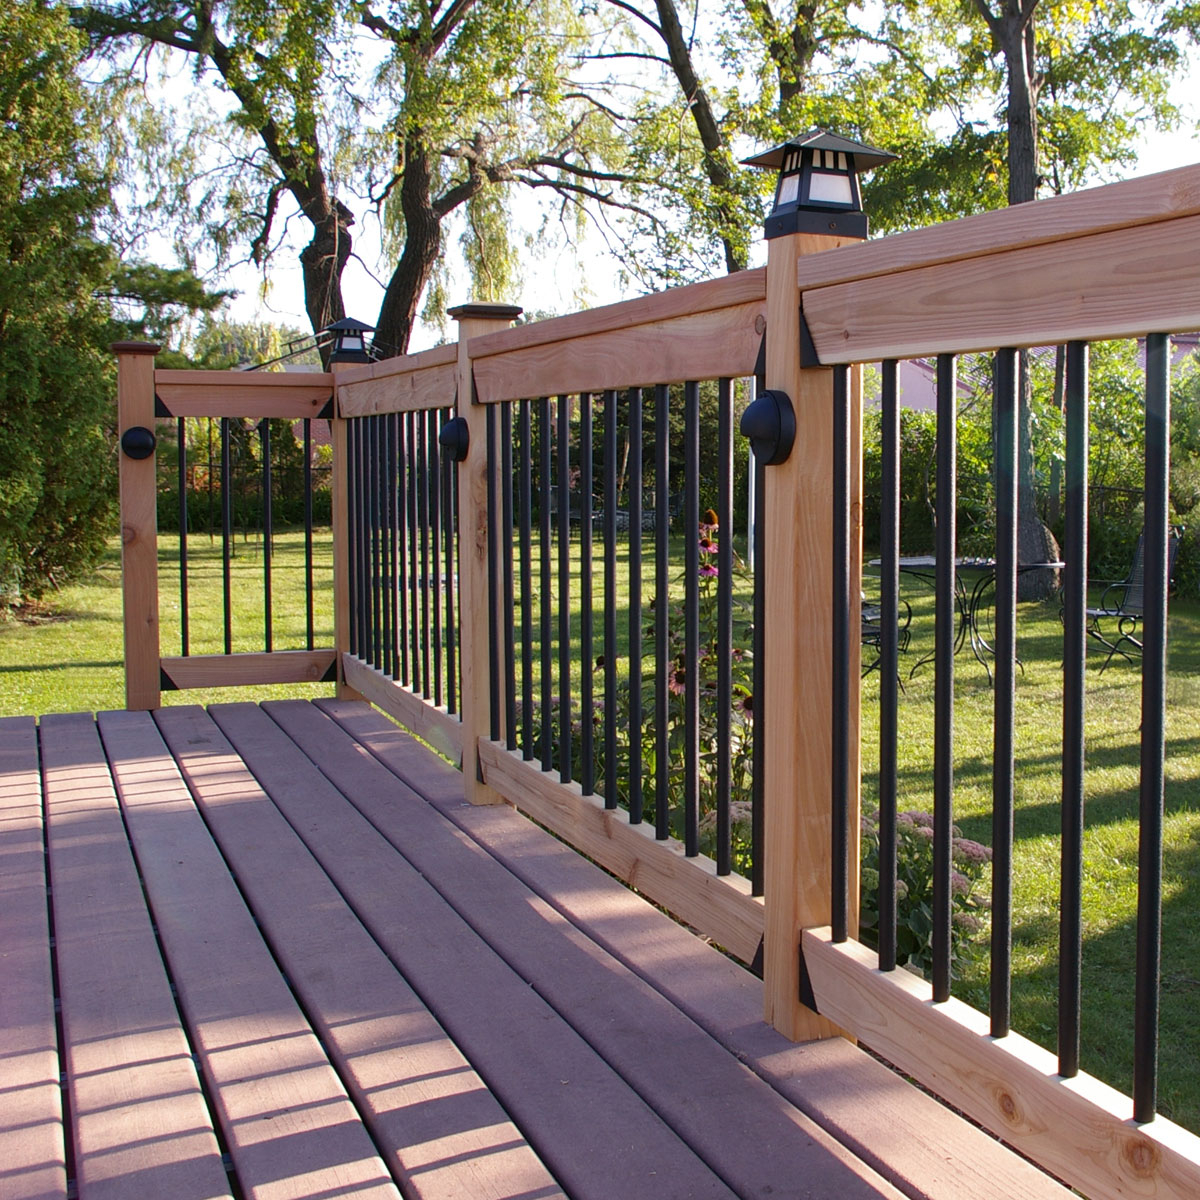 The Deck Railing Designs Design Idea And Decors Cover Deck throughout size 1200 X 1200